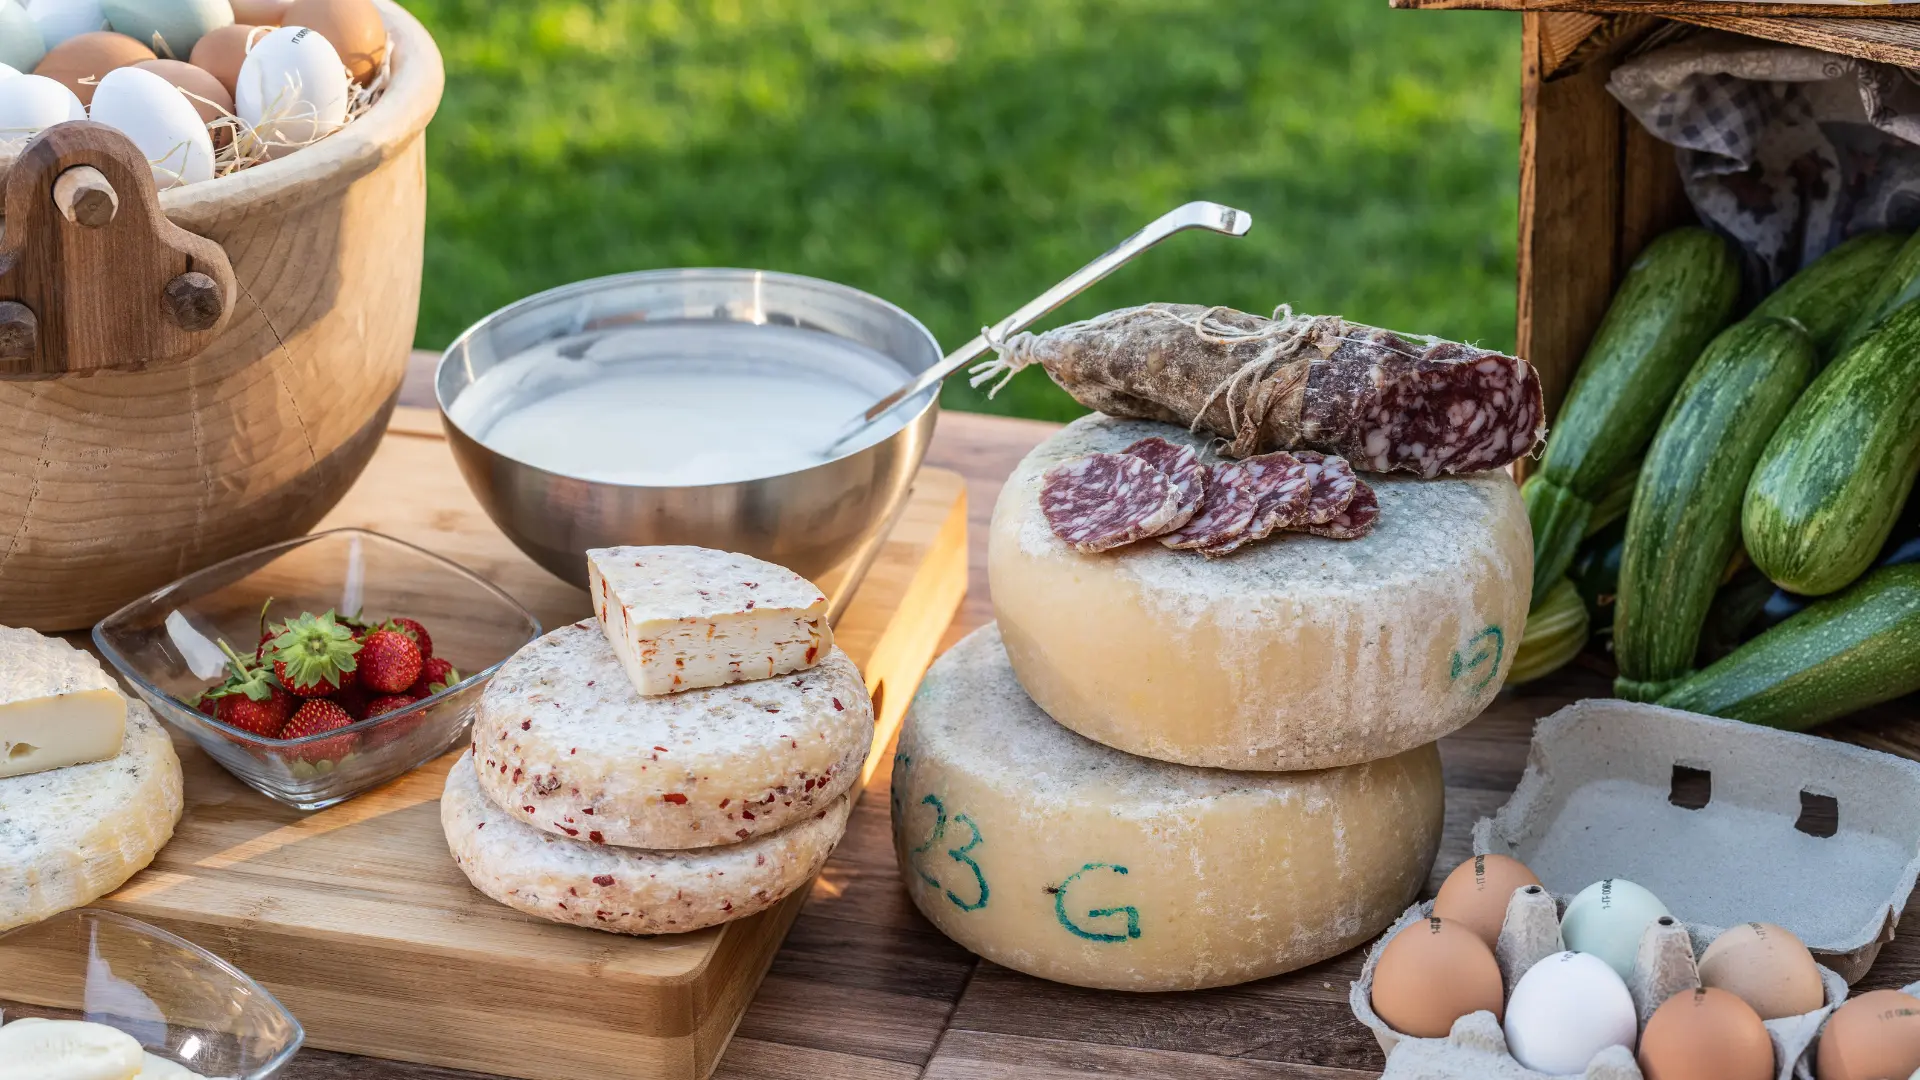 Luxury milk and cheese experience - Educational Farm